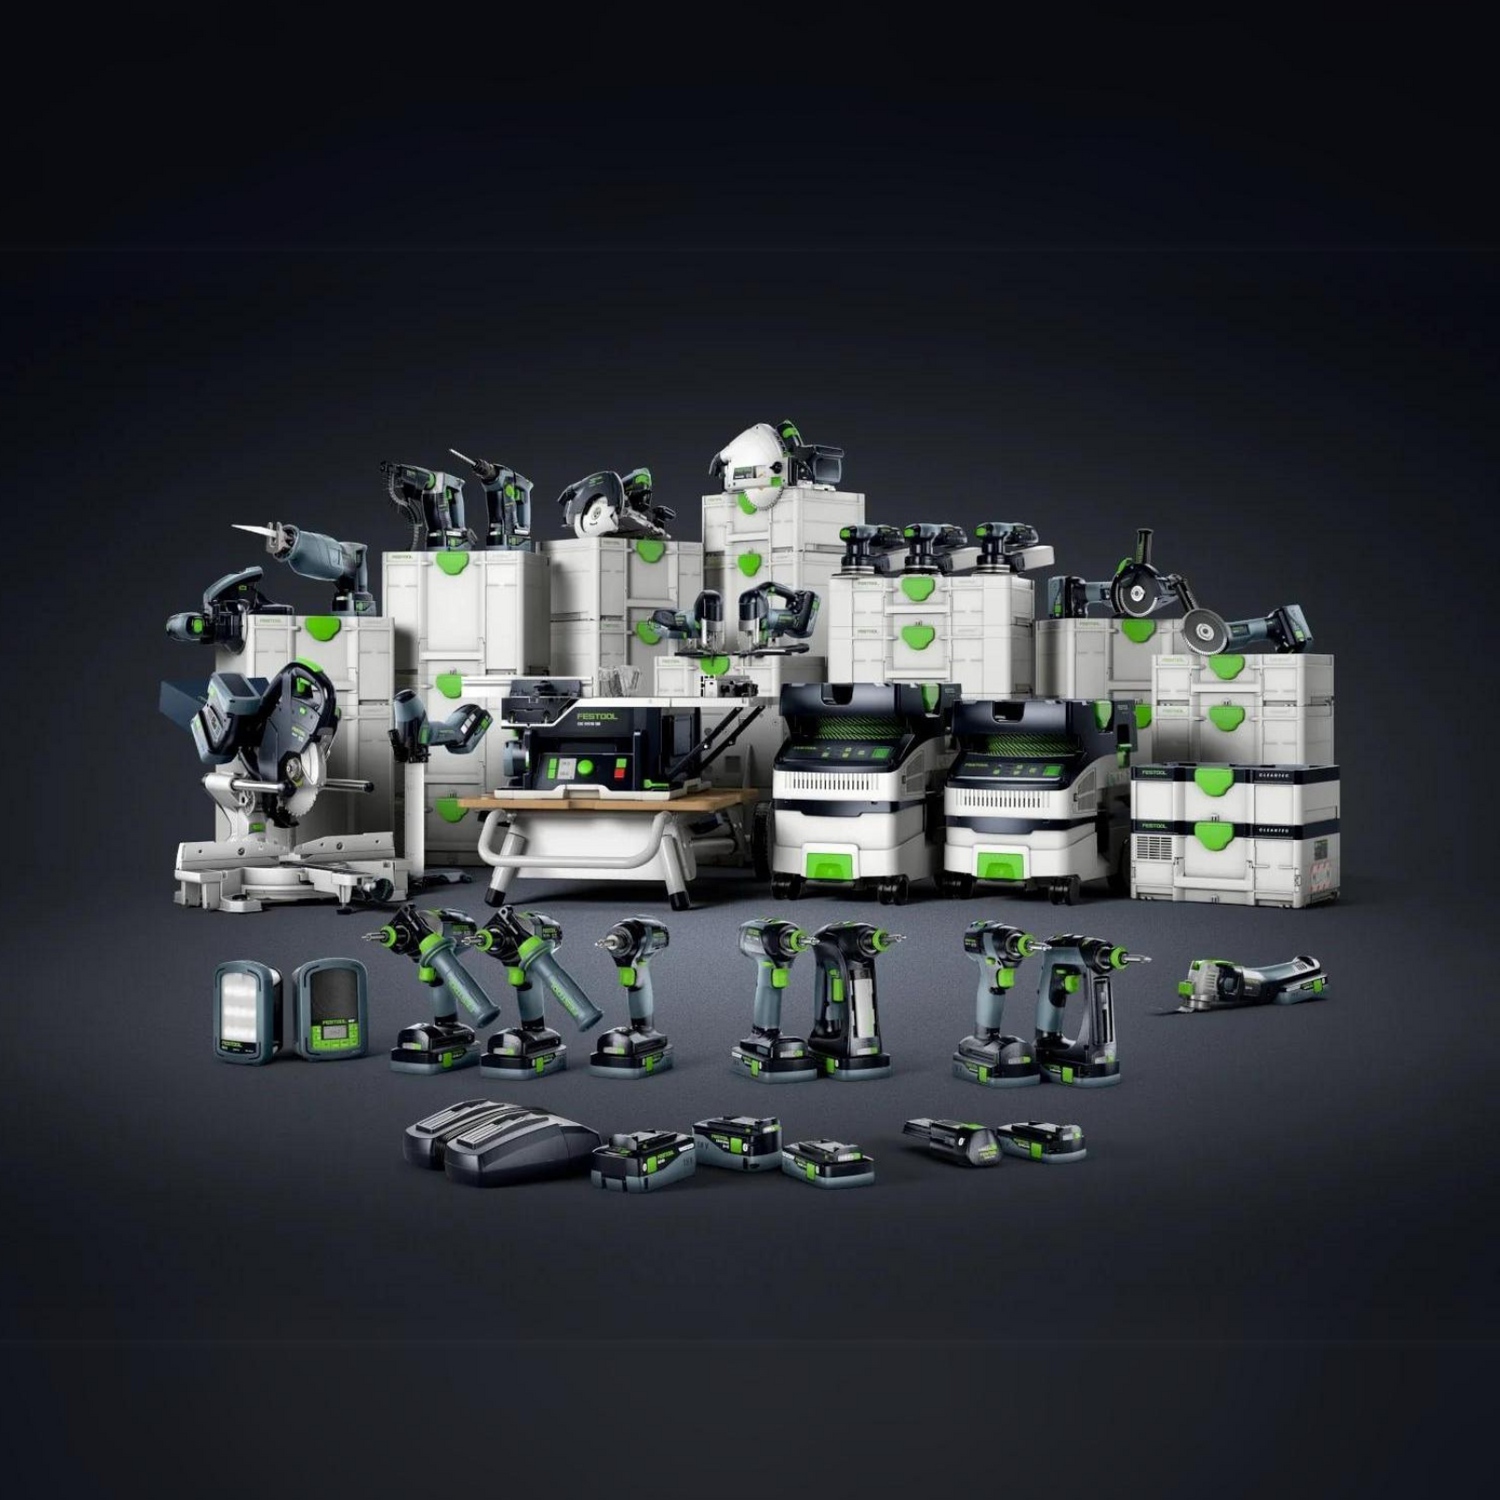 Festool Cordless Promotions (May 1st - July 31st)